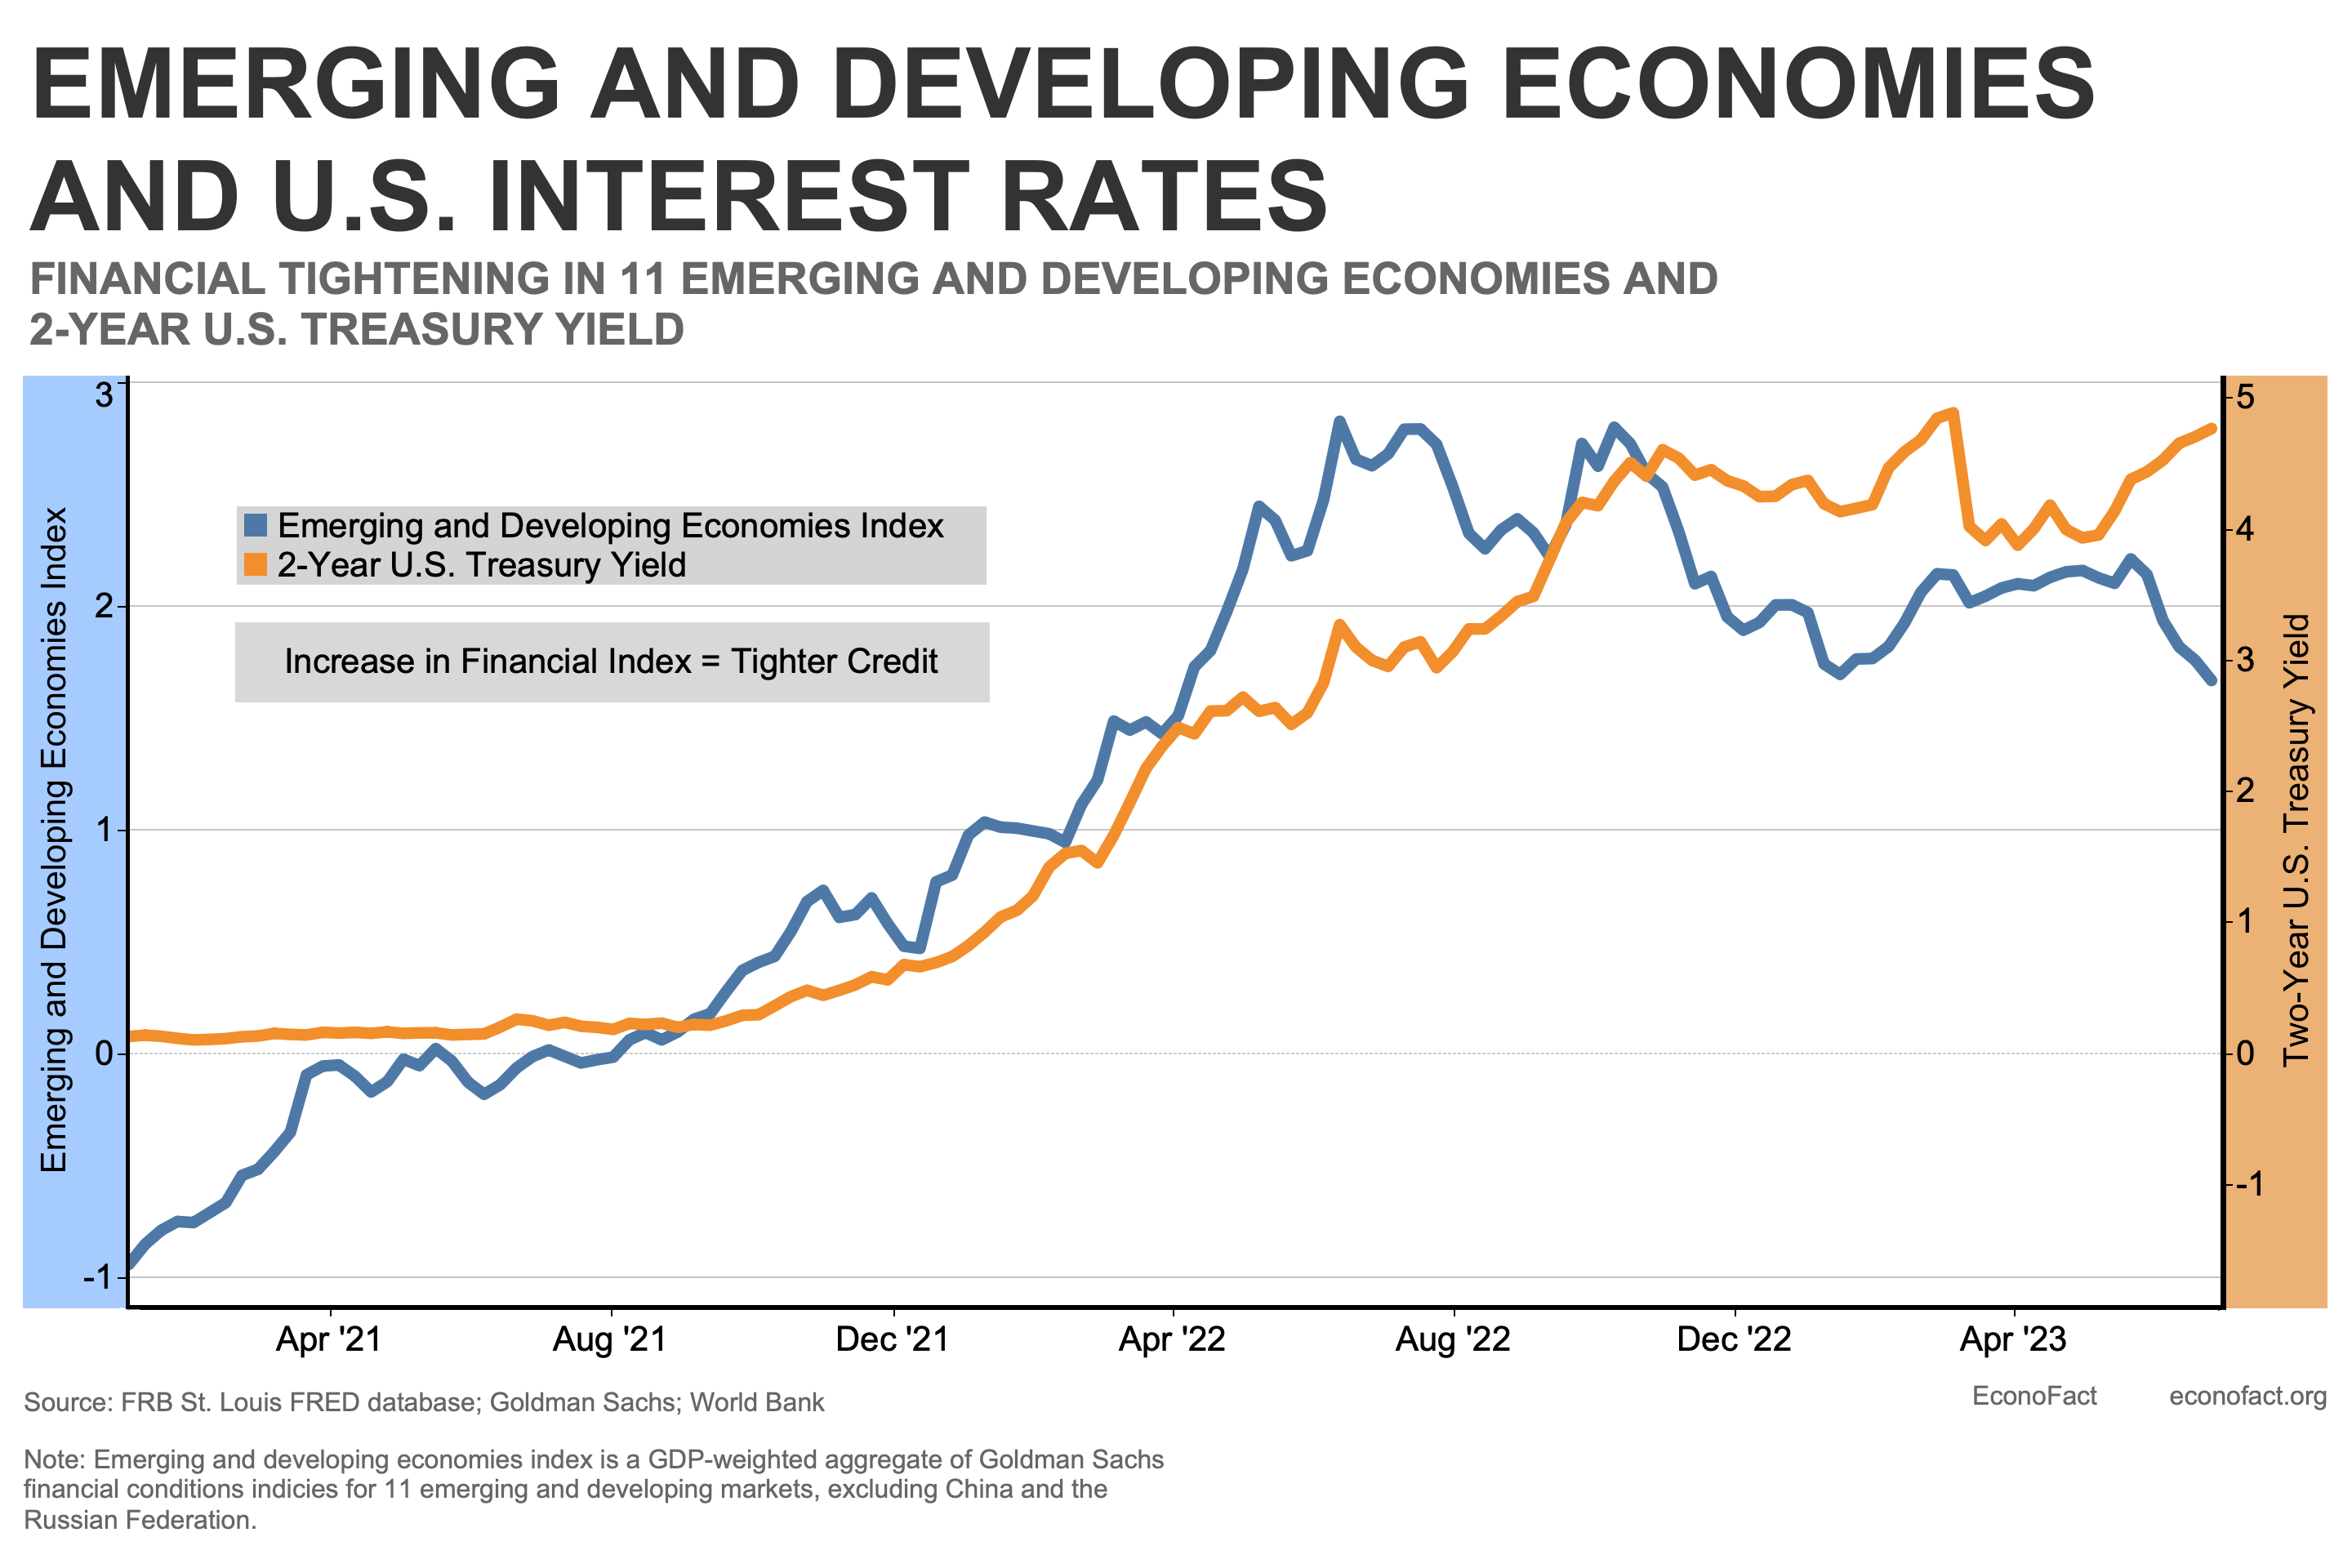 Emerging and Developing Economies and U.S. Interest Rates. Financial Tightening in 11 Emerging and Developing Economies and 2-Year Treasury Yield.